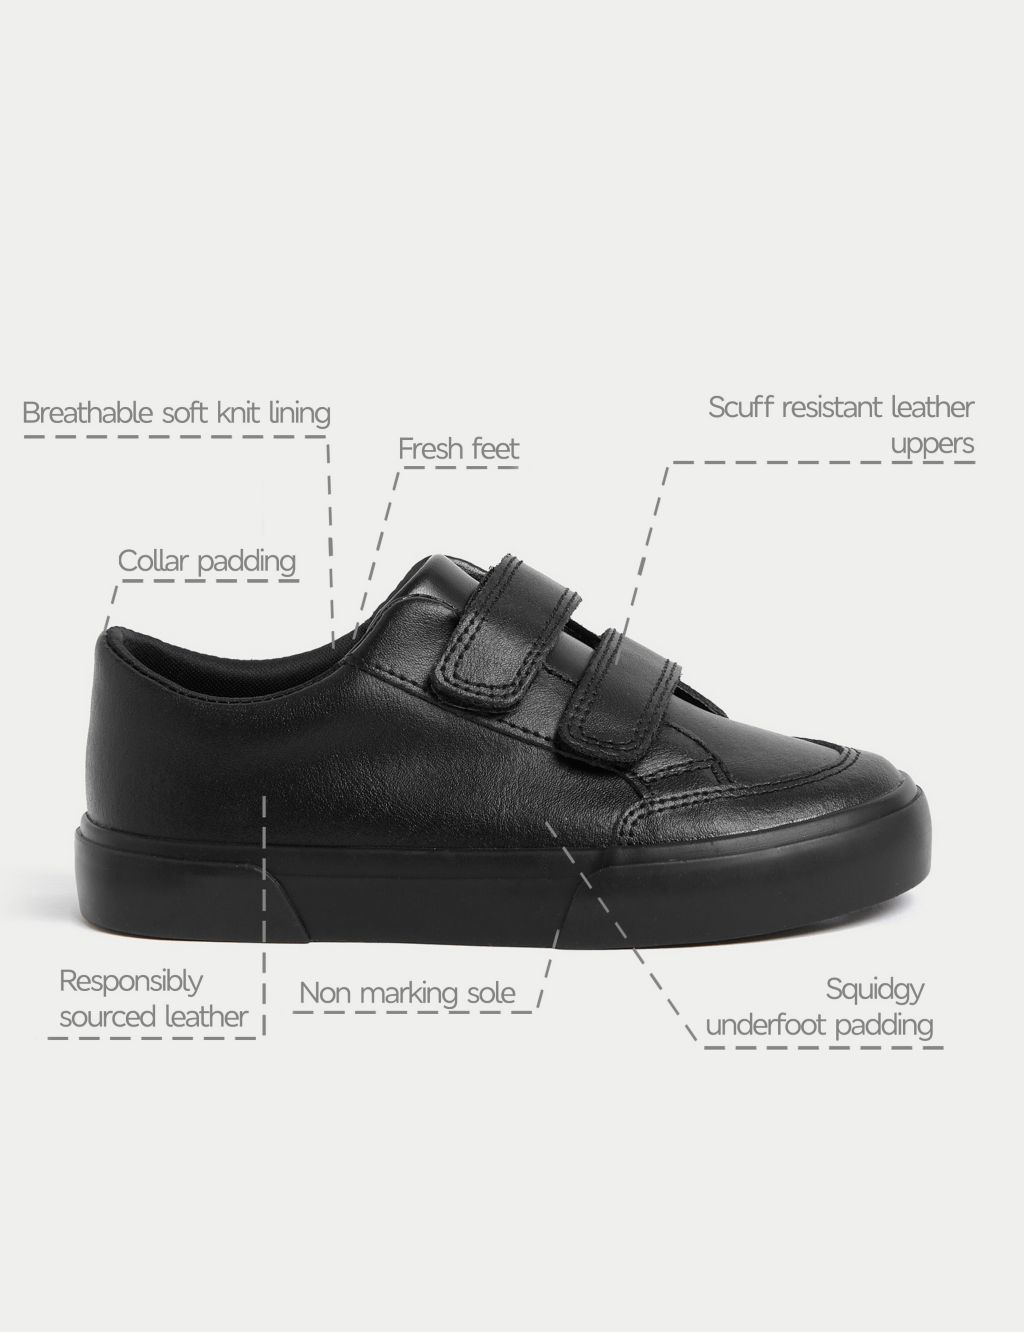 Kids' Leather Freshfeet™ School Shoes (8 Small - 2 Large) image 5